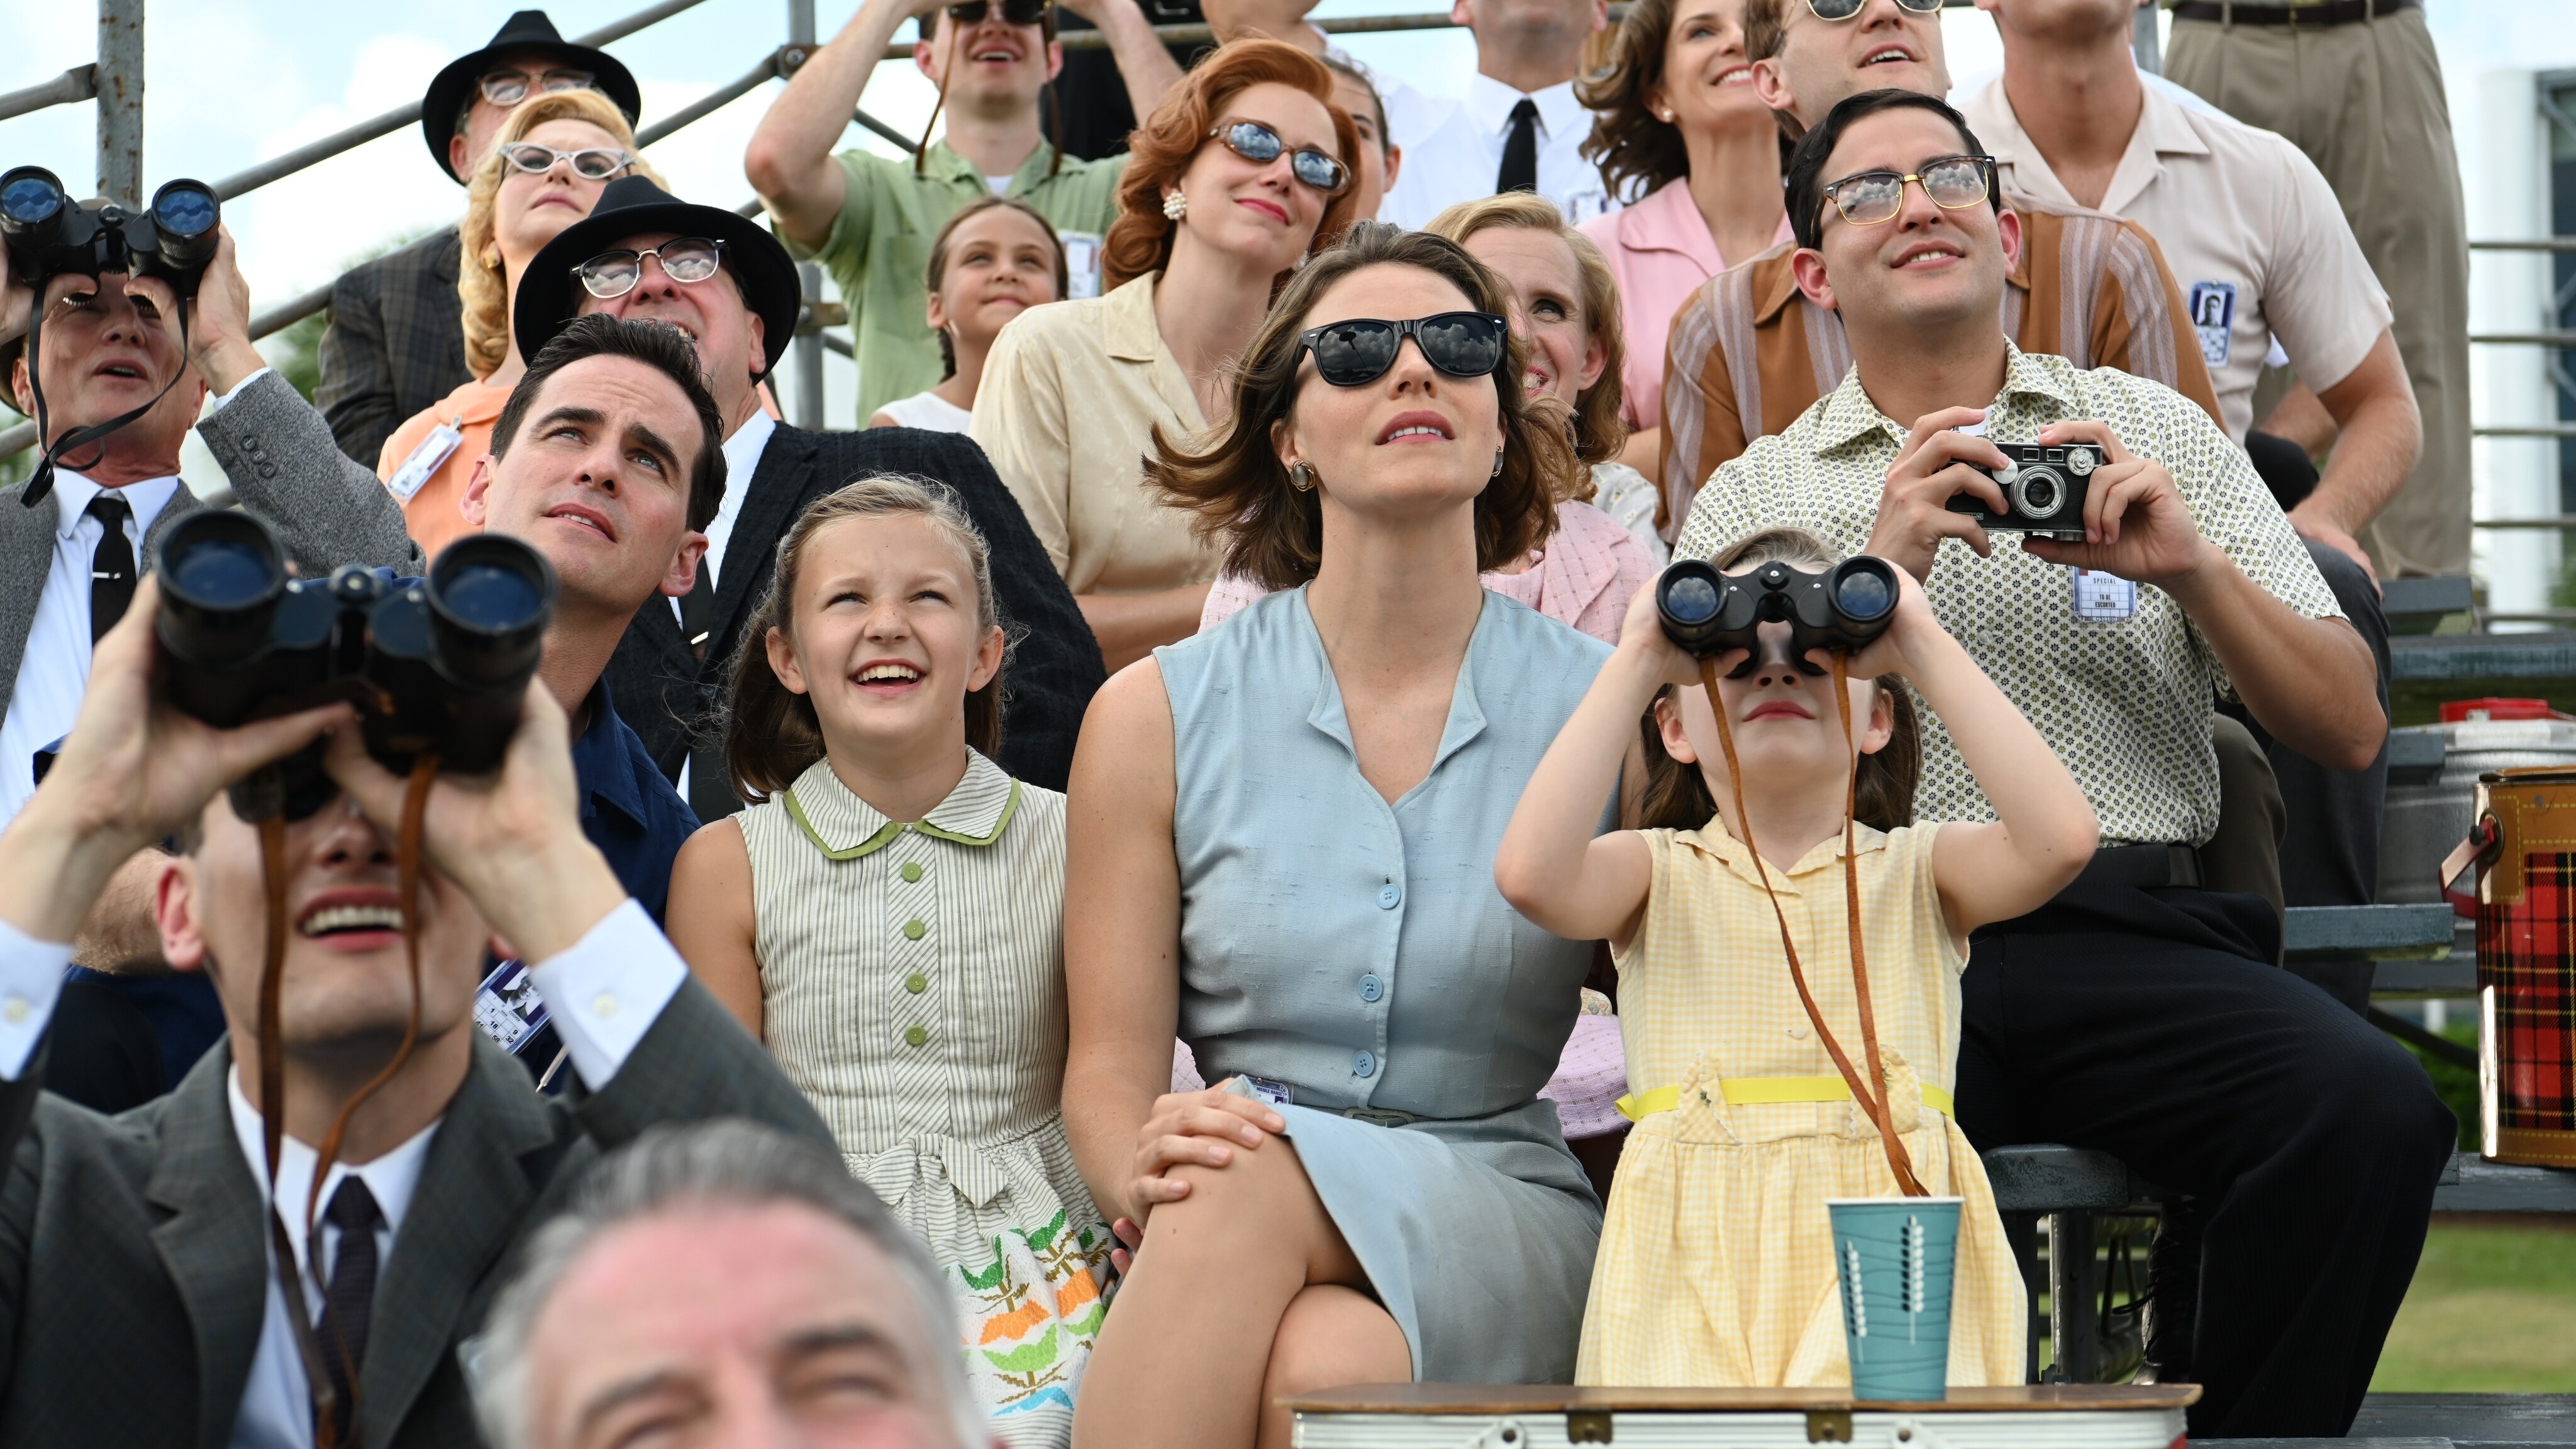 Gordon Cooper played by Colin O’Donoghue and Trudy Cooper played by Eloise Mumford sit with their daughters watching the launch of a test rocket in National Geographic's THE RIGHT STUFF streaming on Disney+. (National Geographic/Gene Page)